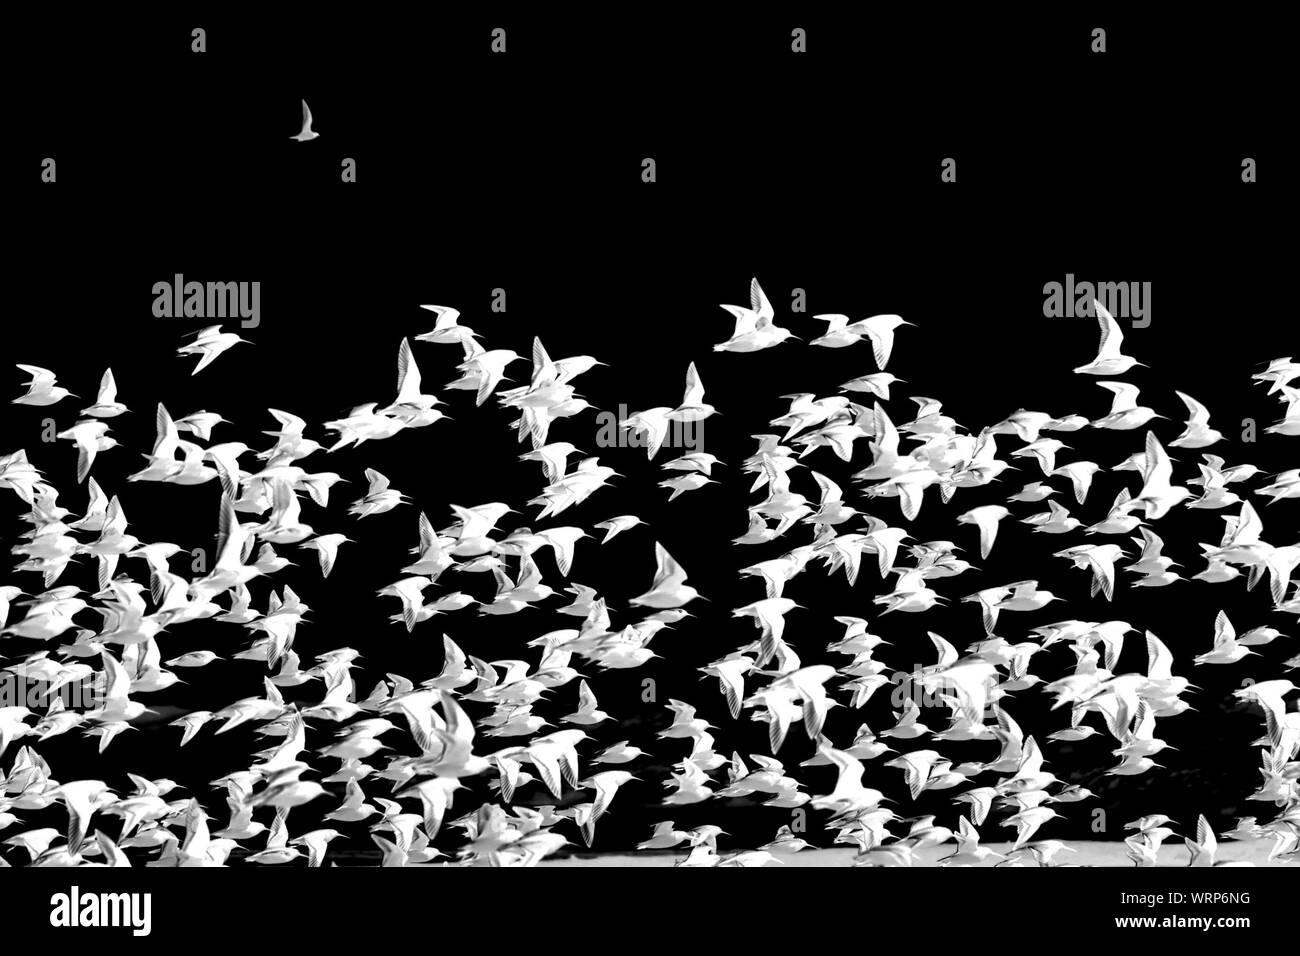 Flock Of White Birds In Air Stock Photo - Alamy